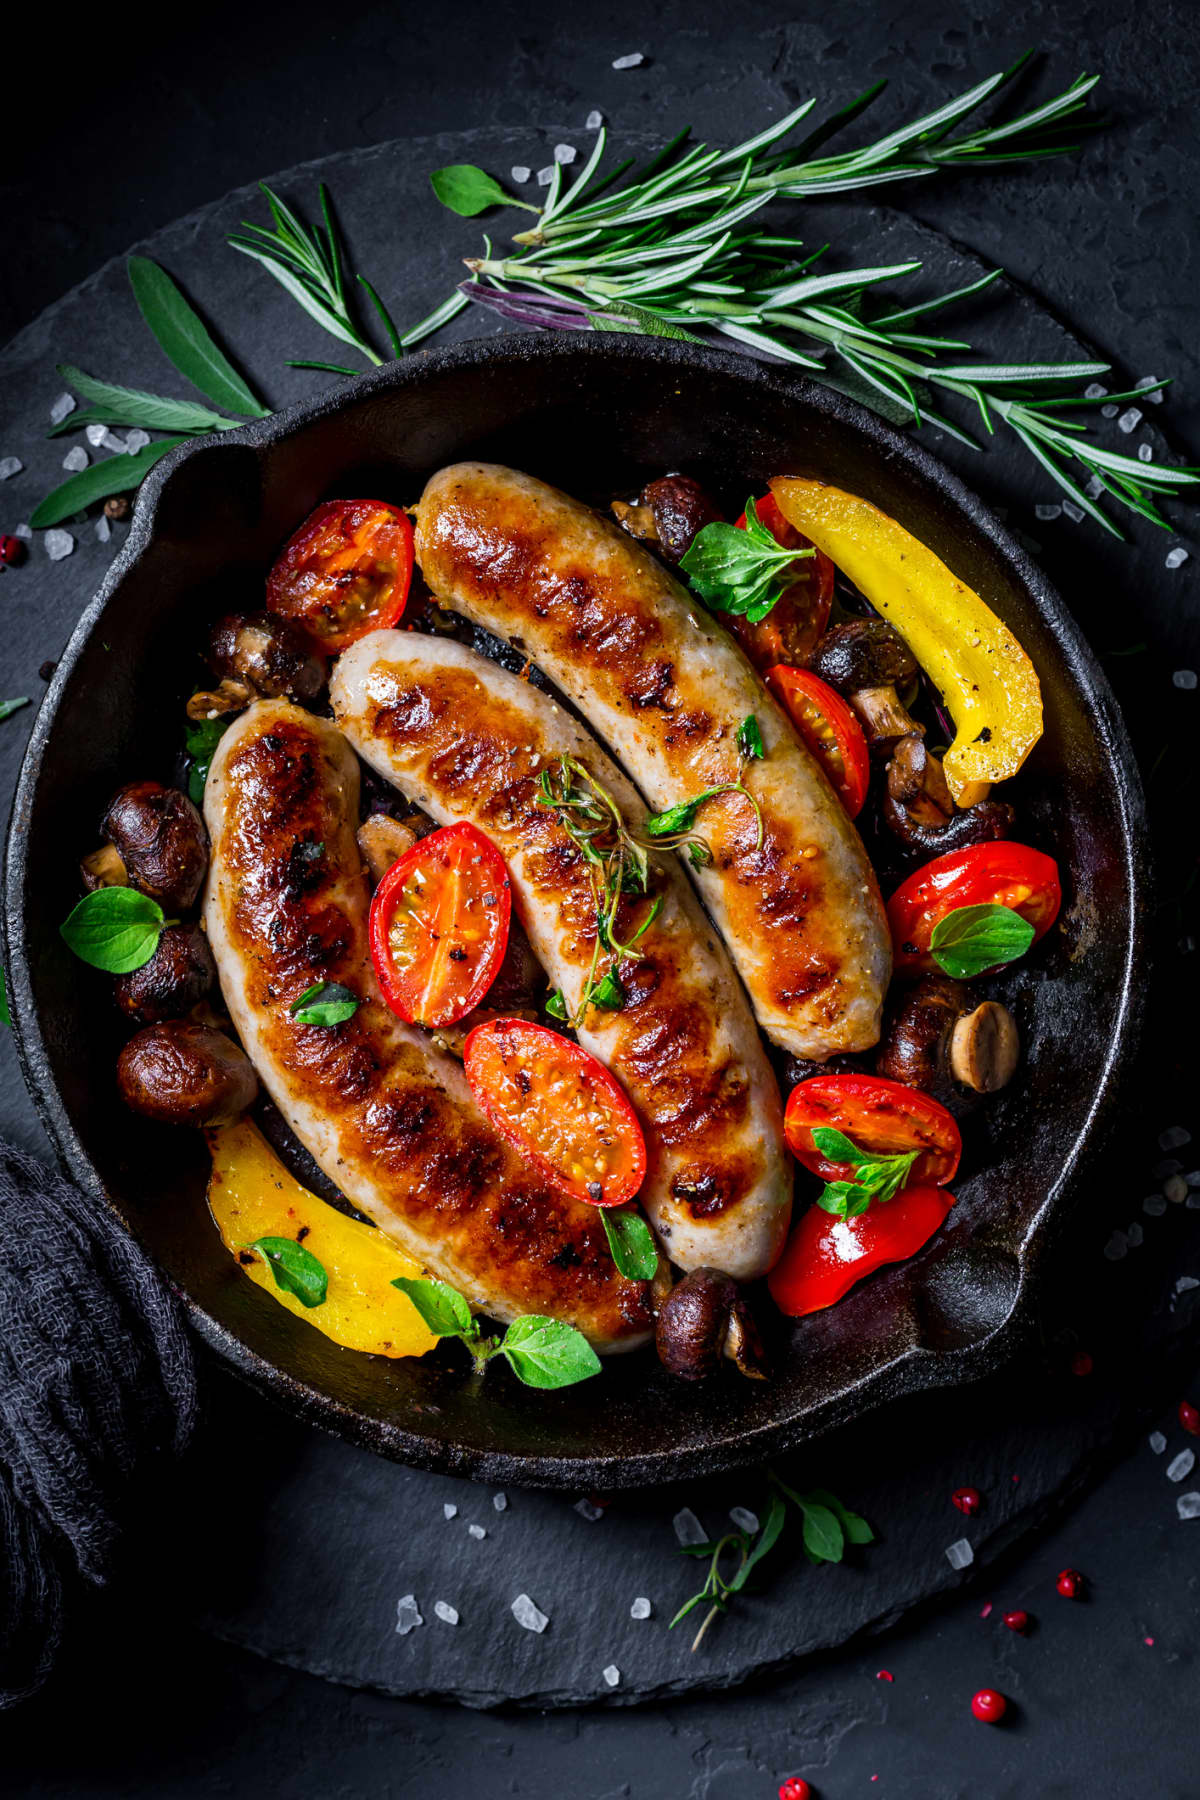 Sausage with peppers in a pan